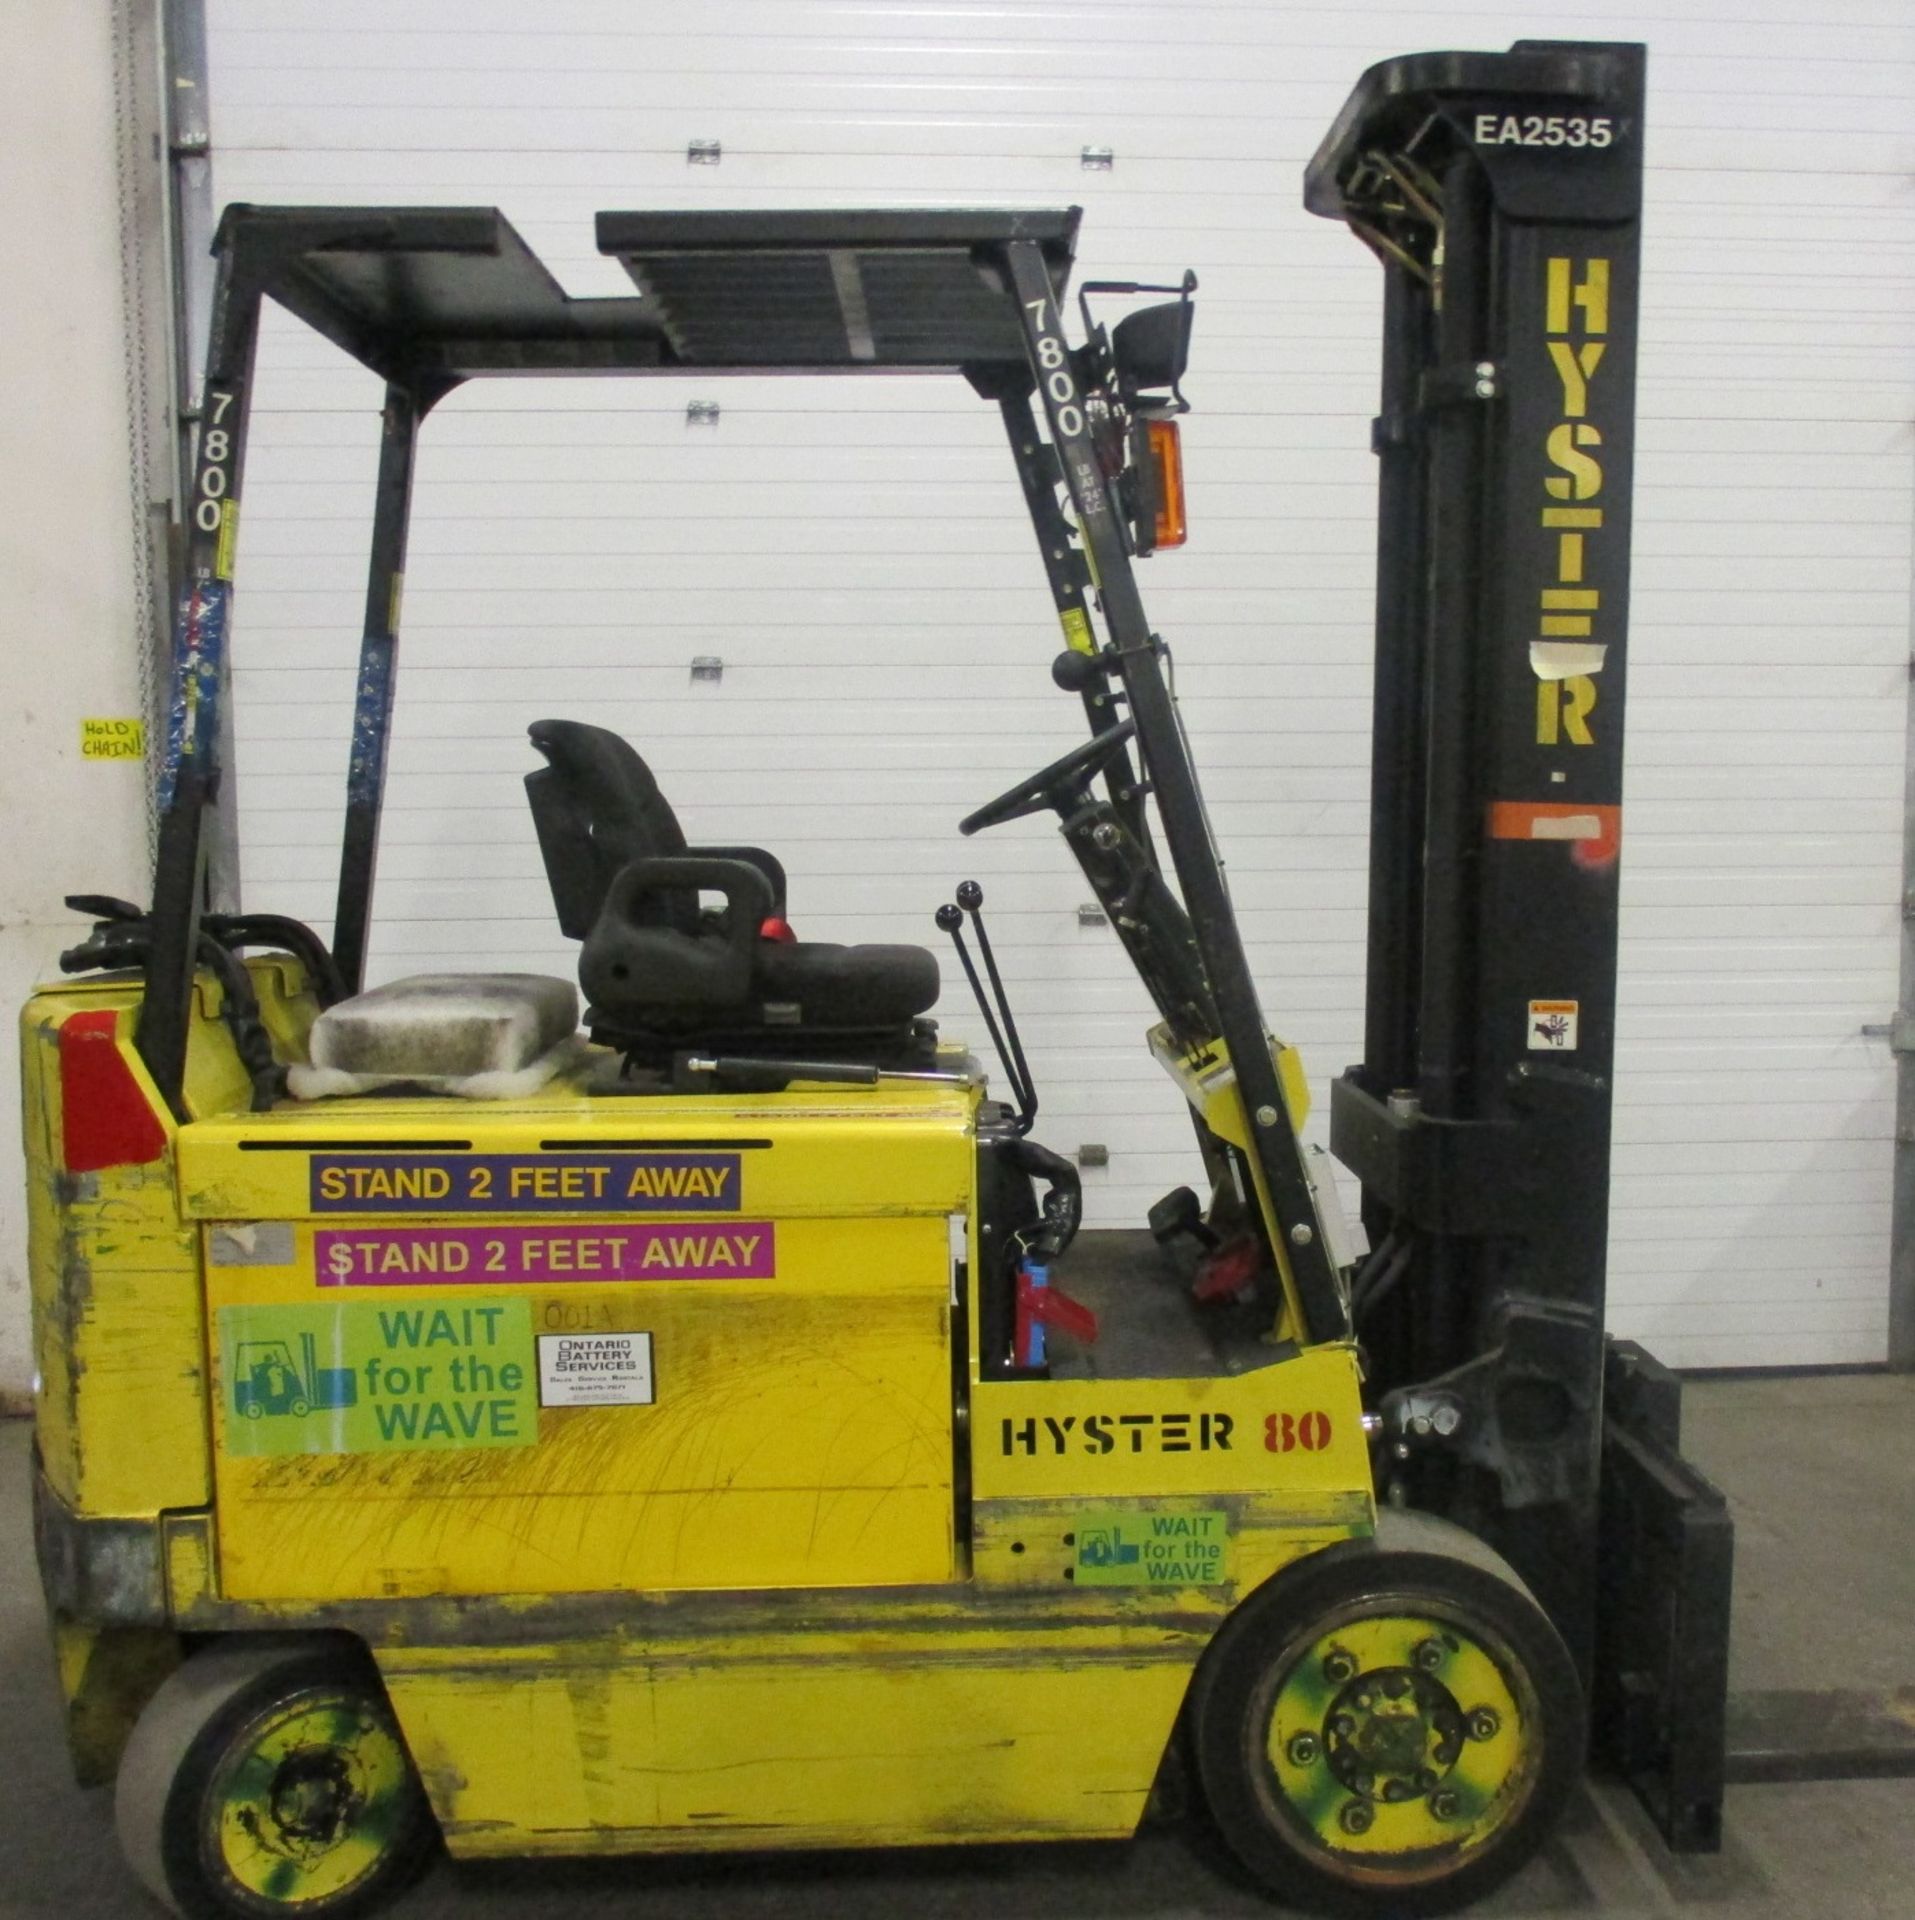 Hyster Electric Forklift 8000lbs Capacity with sideshift and 48" forks - 2004 unit (shipping quote